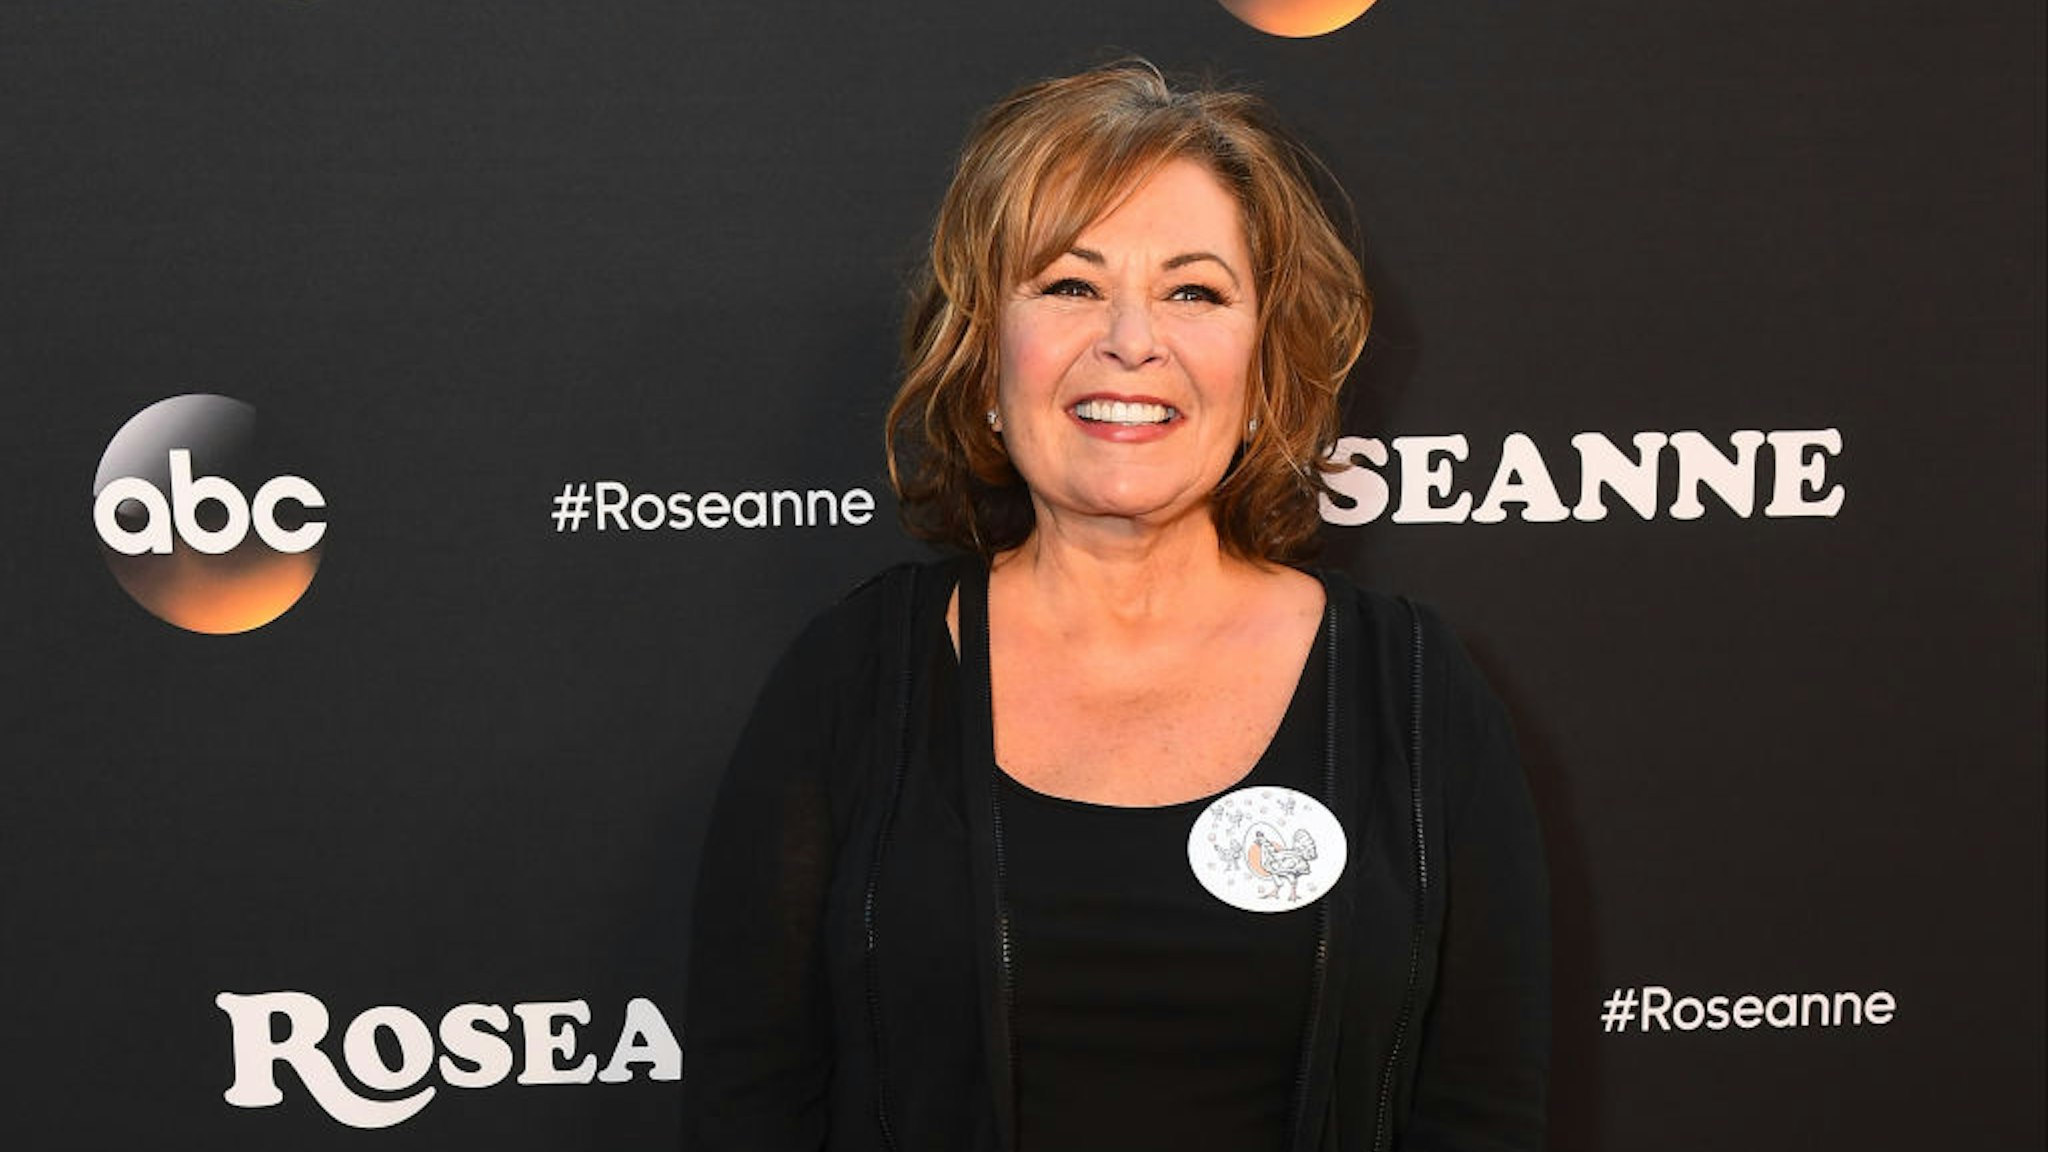 ROSEANNE - Roseanne premiere event with KWalt Disney Television via Getty Images contest winners.